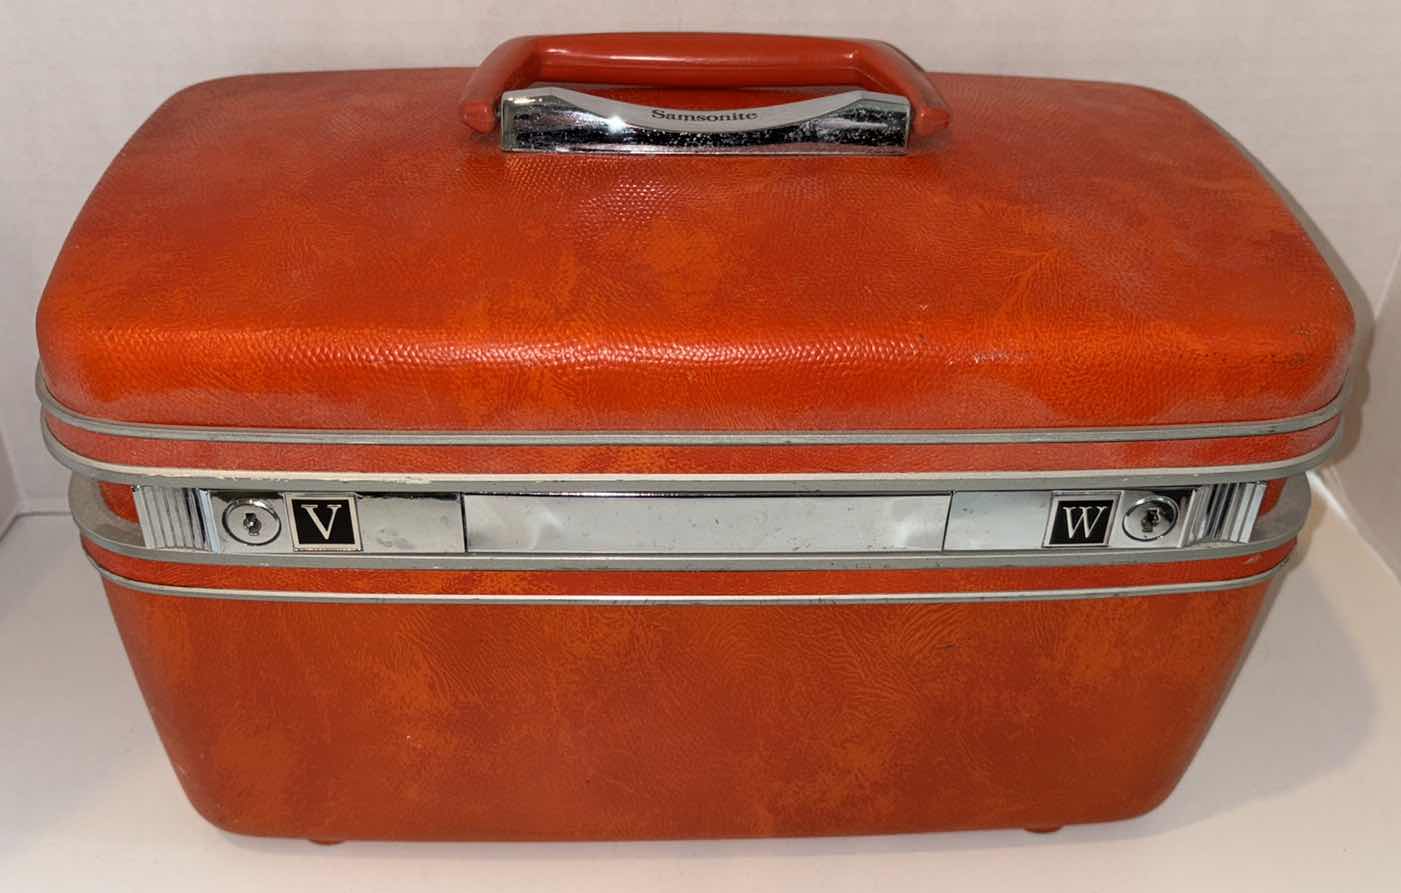 Photo 1 of VINTAGE SAMSONITE SILHOUETTE HARD COSMETIC TRAVELING CASE 8” x 15” H9.5”